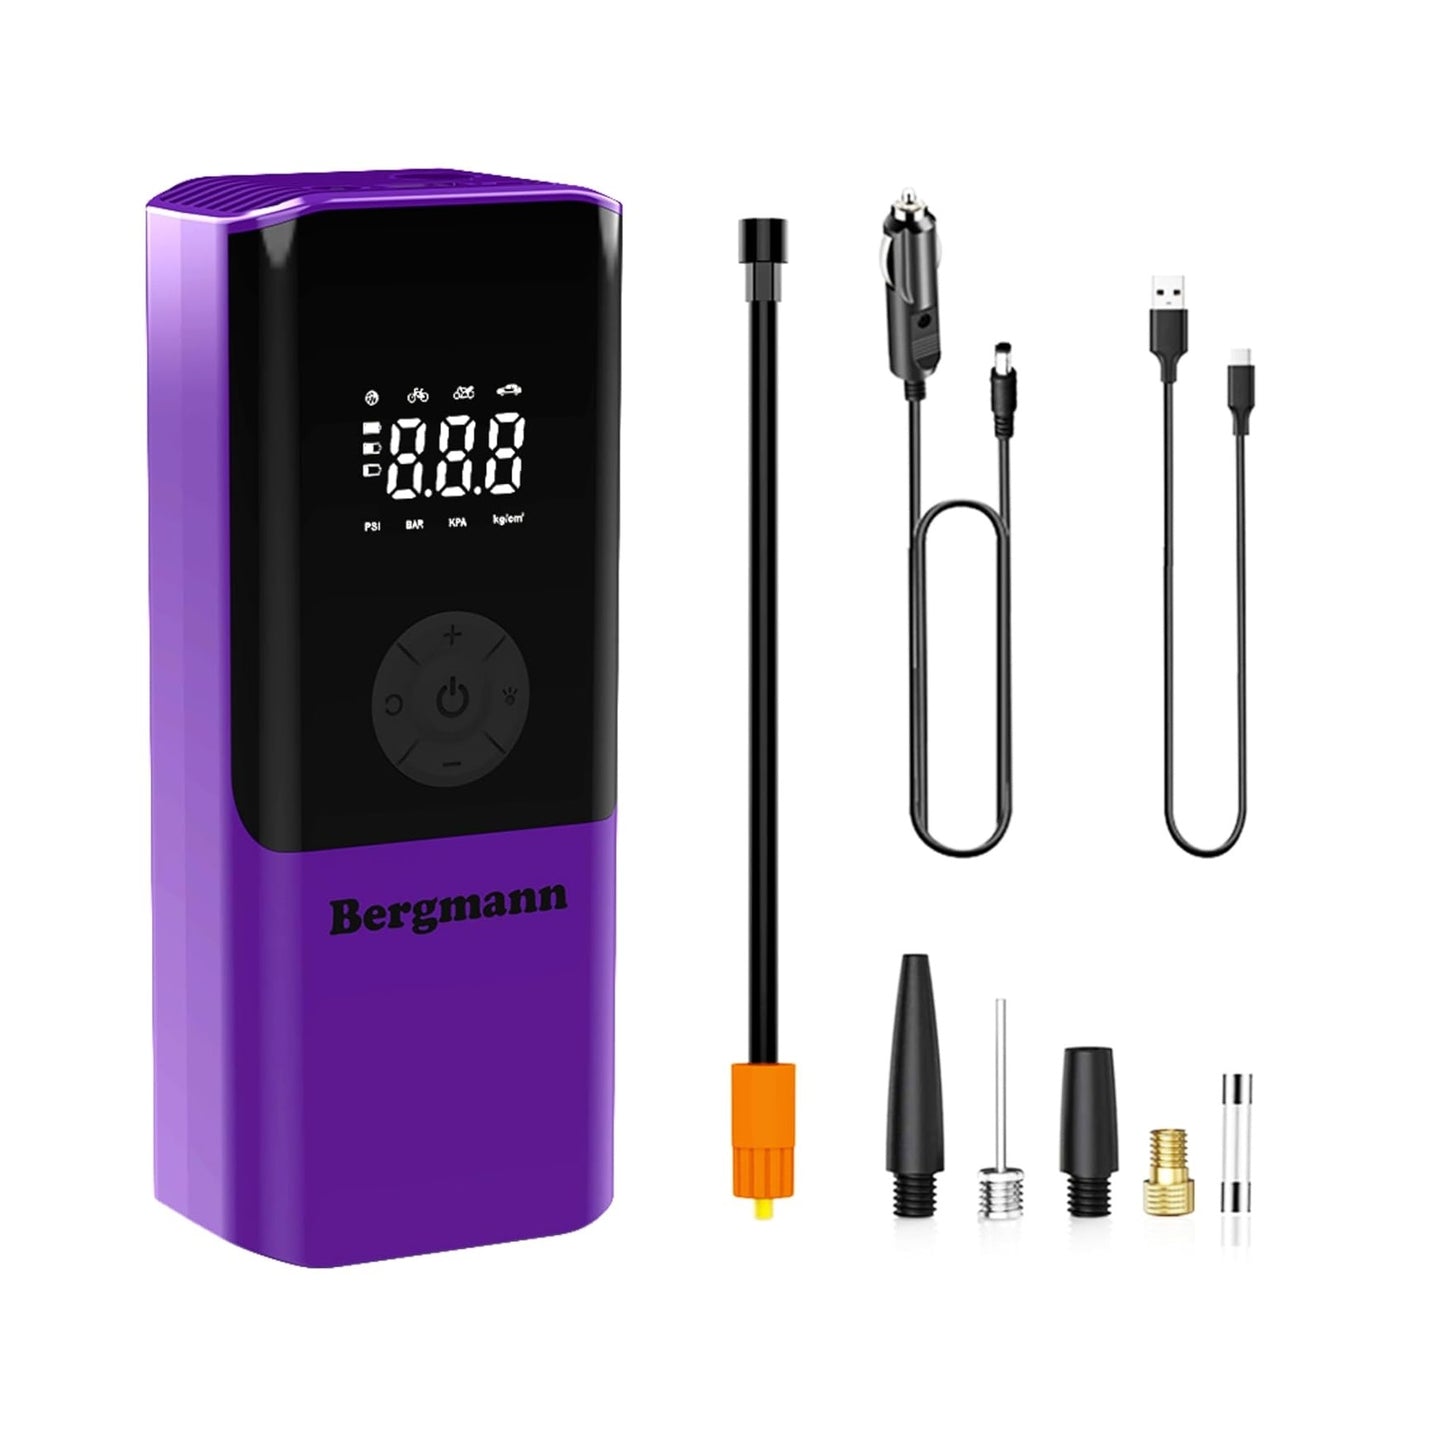 Bergmann VoltAir BCC-100D Cordless + Corded 2in1 Portable/Digital Tyre Inflator | 150 psi | 4500mAH Large Battery | LED Display | Power Bank | Type-C Port | for Cars, Bikes, Toys & Bicycles | Luxury Purple